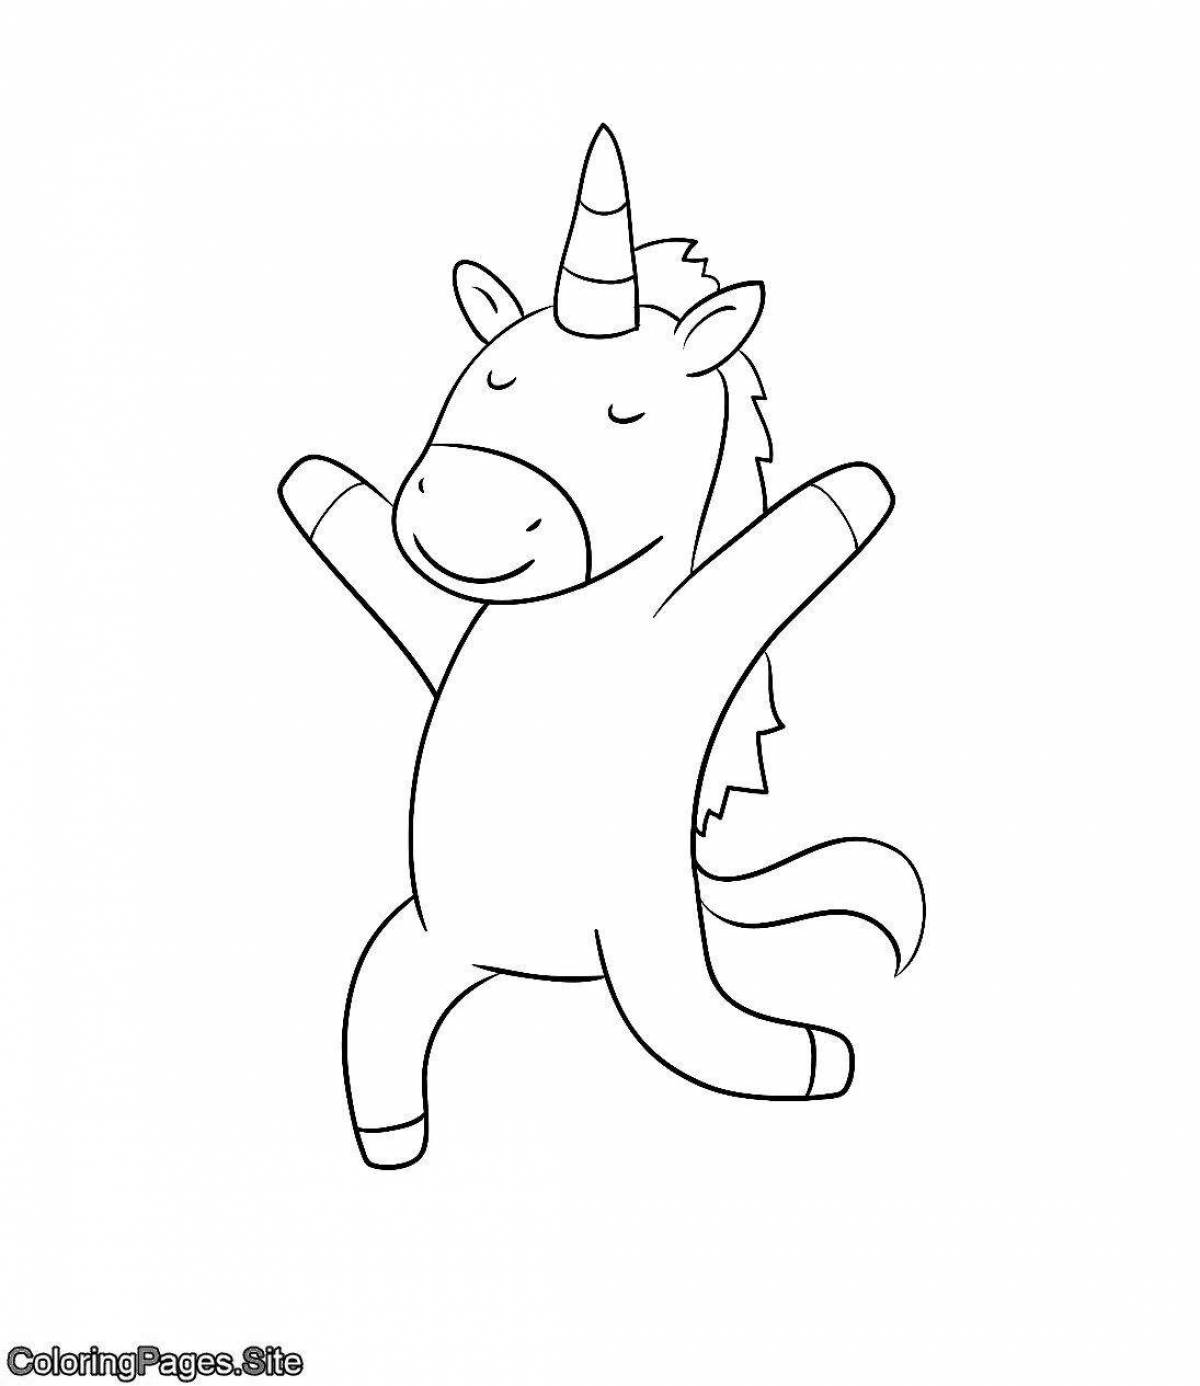 Luxury coloring how to draw a unicorn